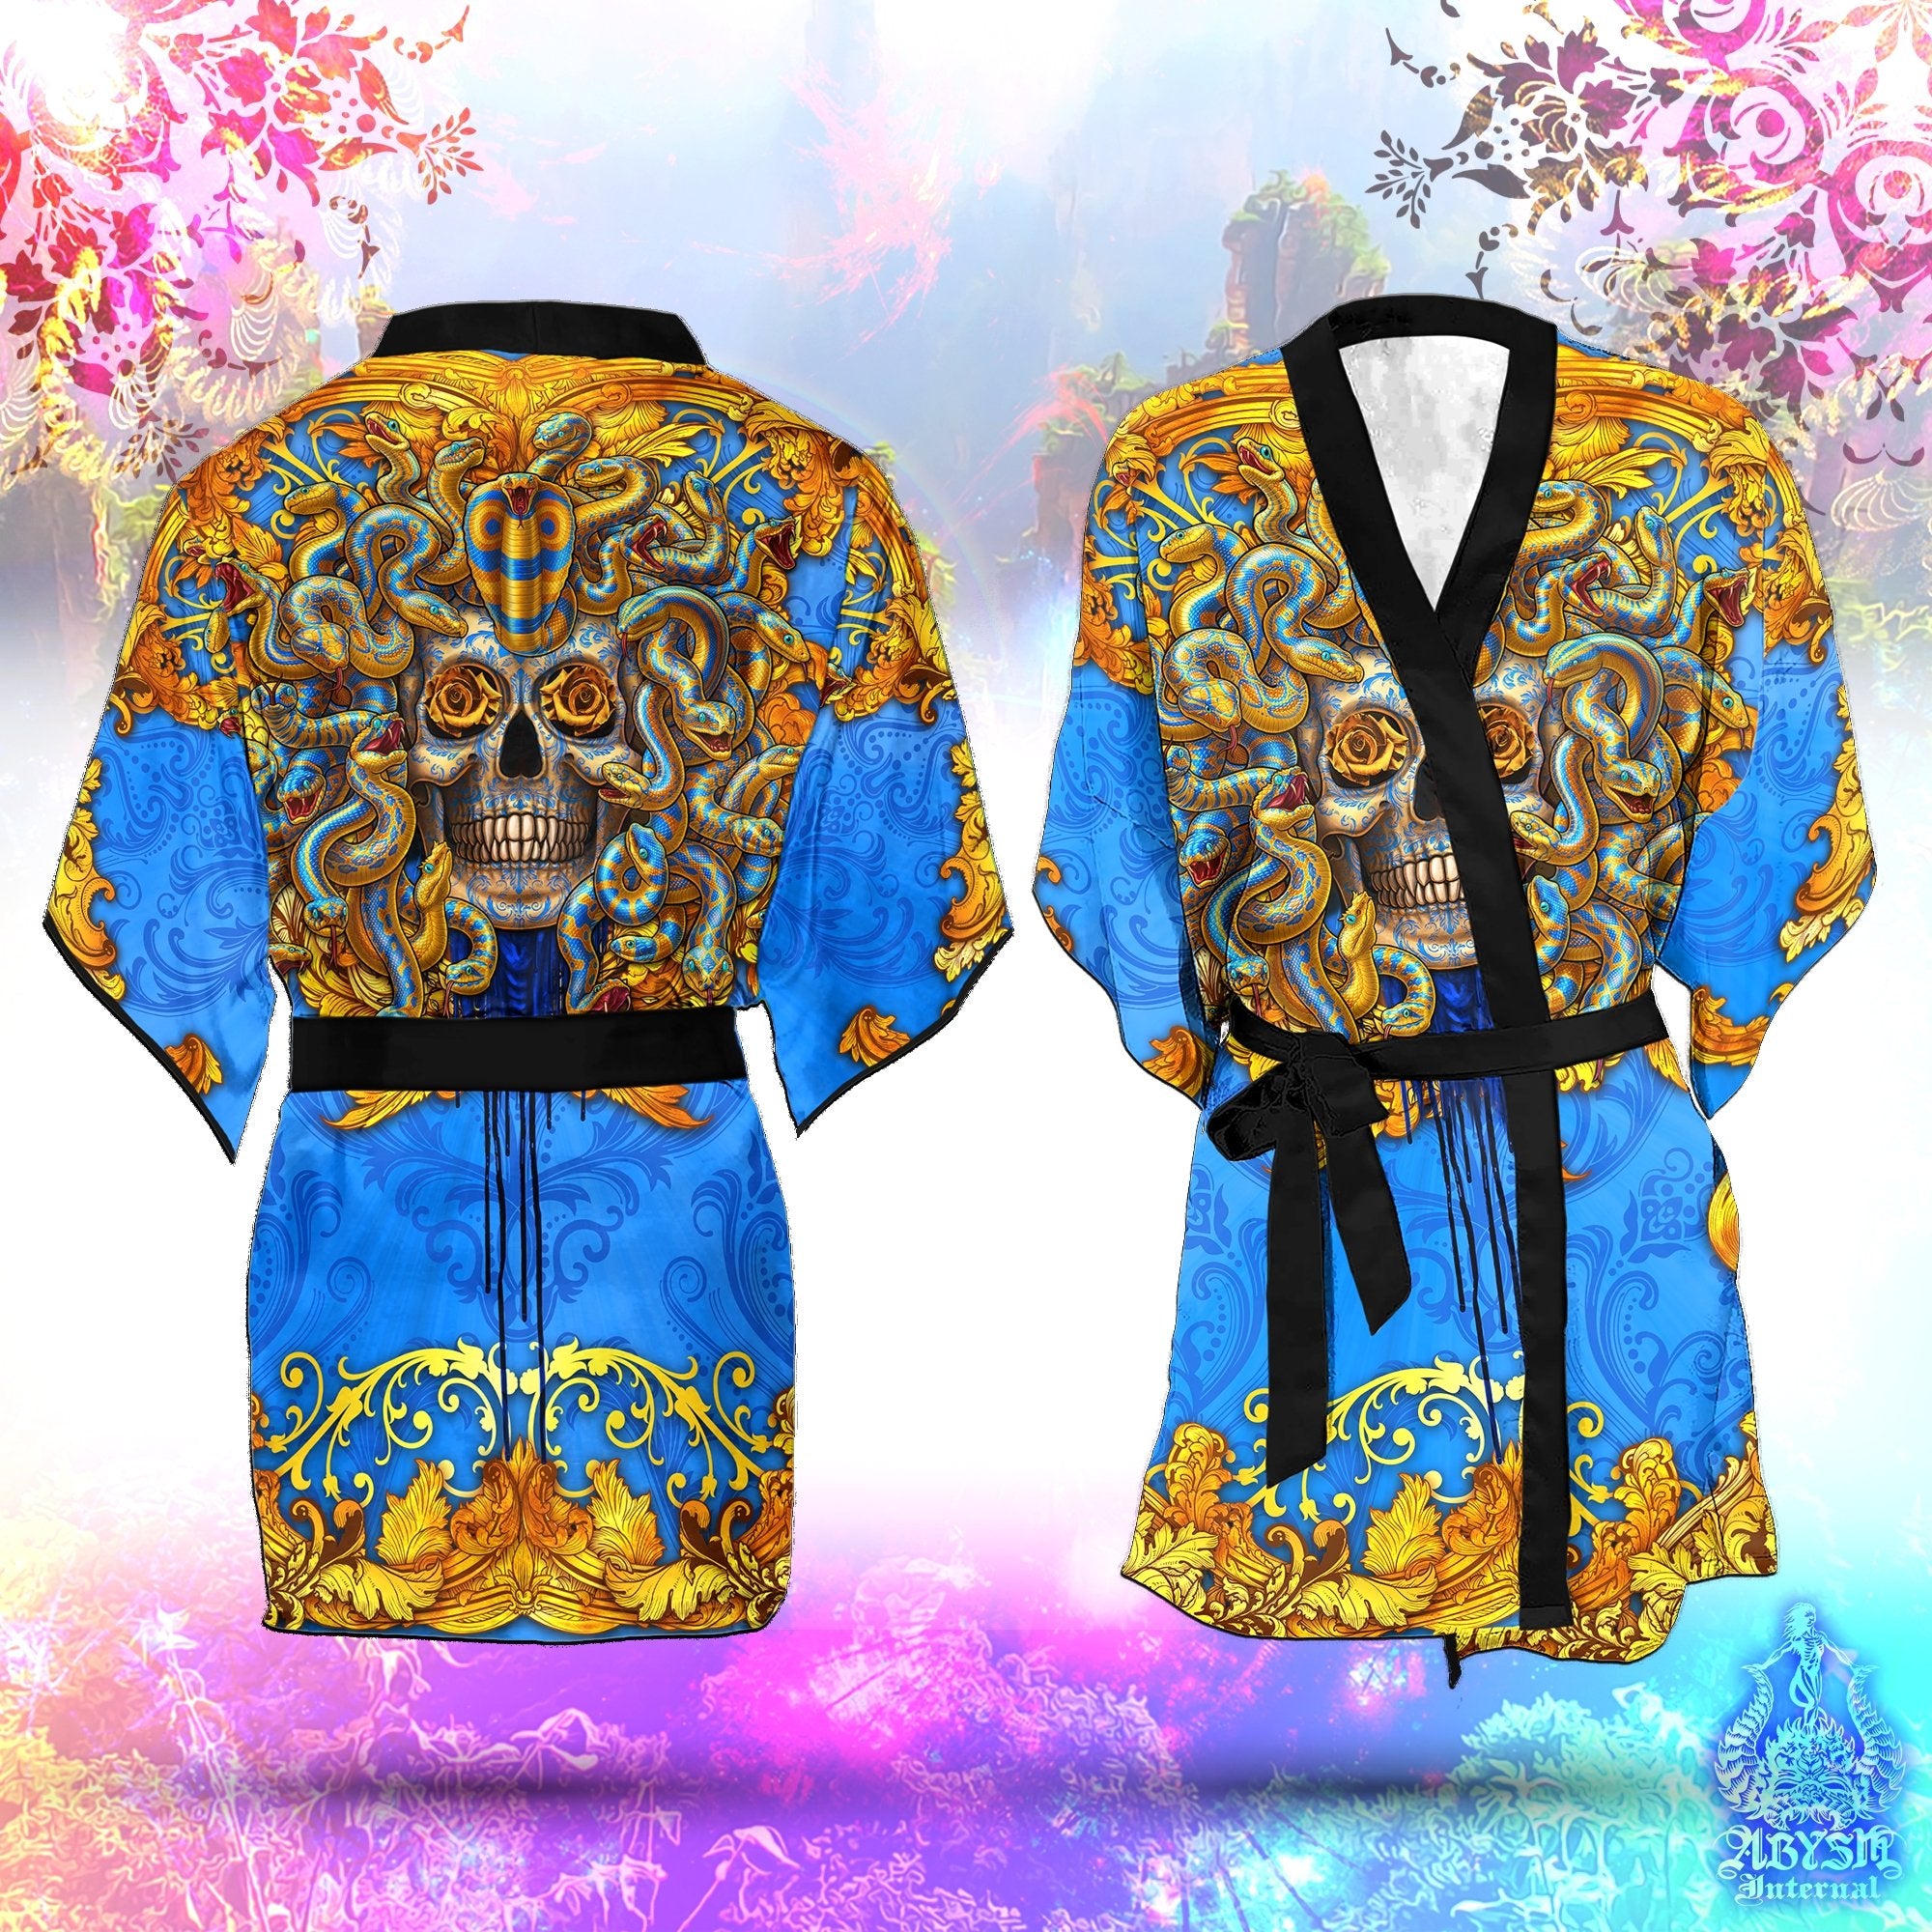 Medusa Skull Cover Up, Beach Outfit, Party Kimono, Summer Festival Robe, Indie and Alternative Clothing, Unisex - Cyan Gold - Abysm Internal